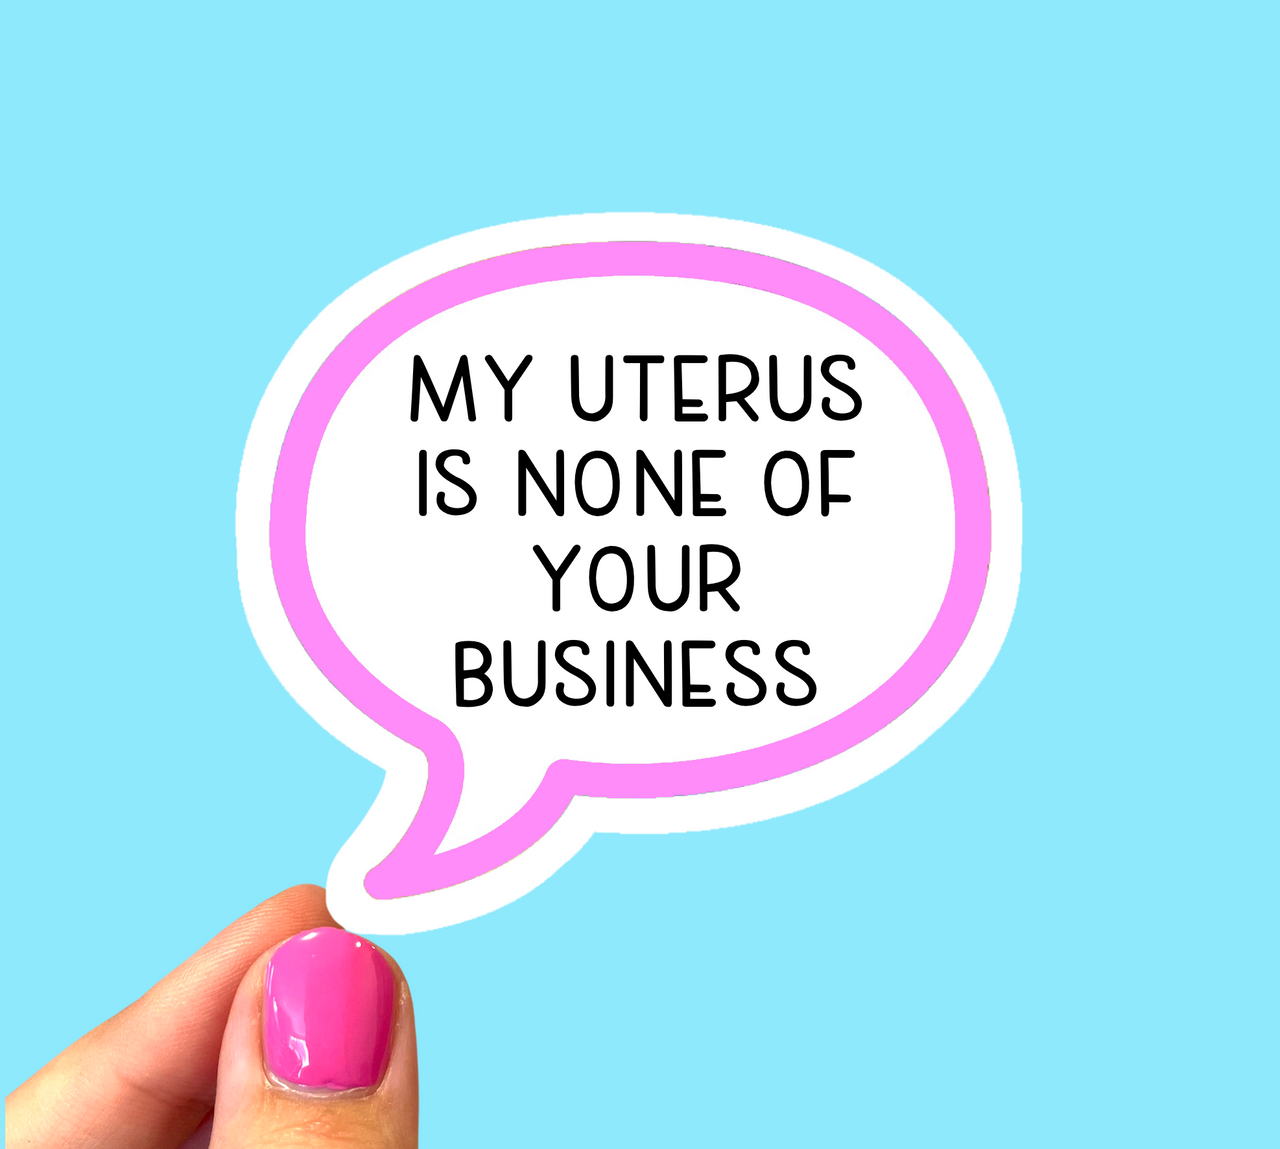 My uterus is none of your business